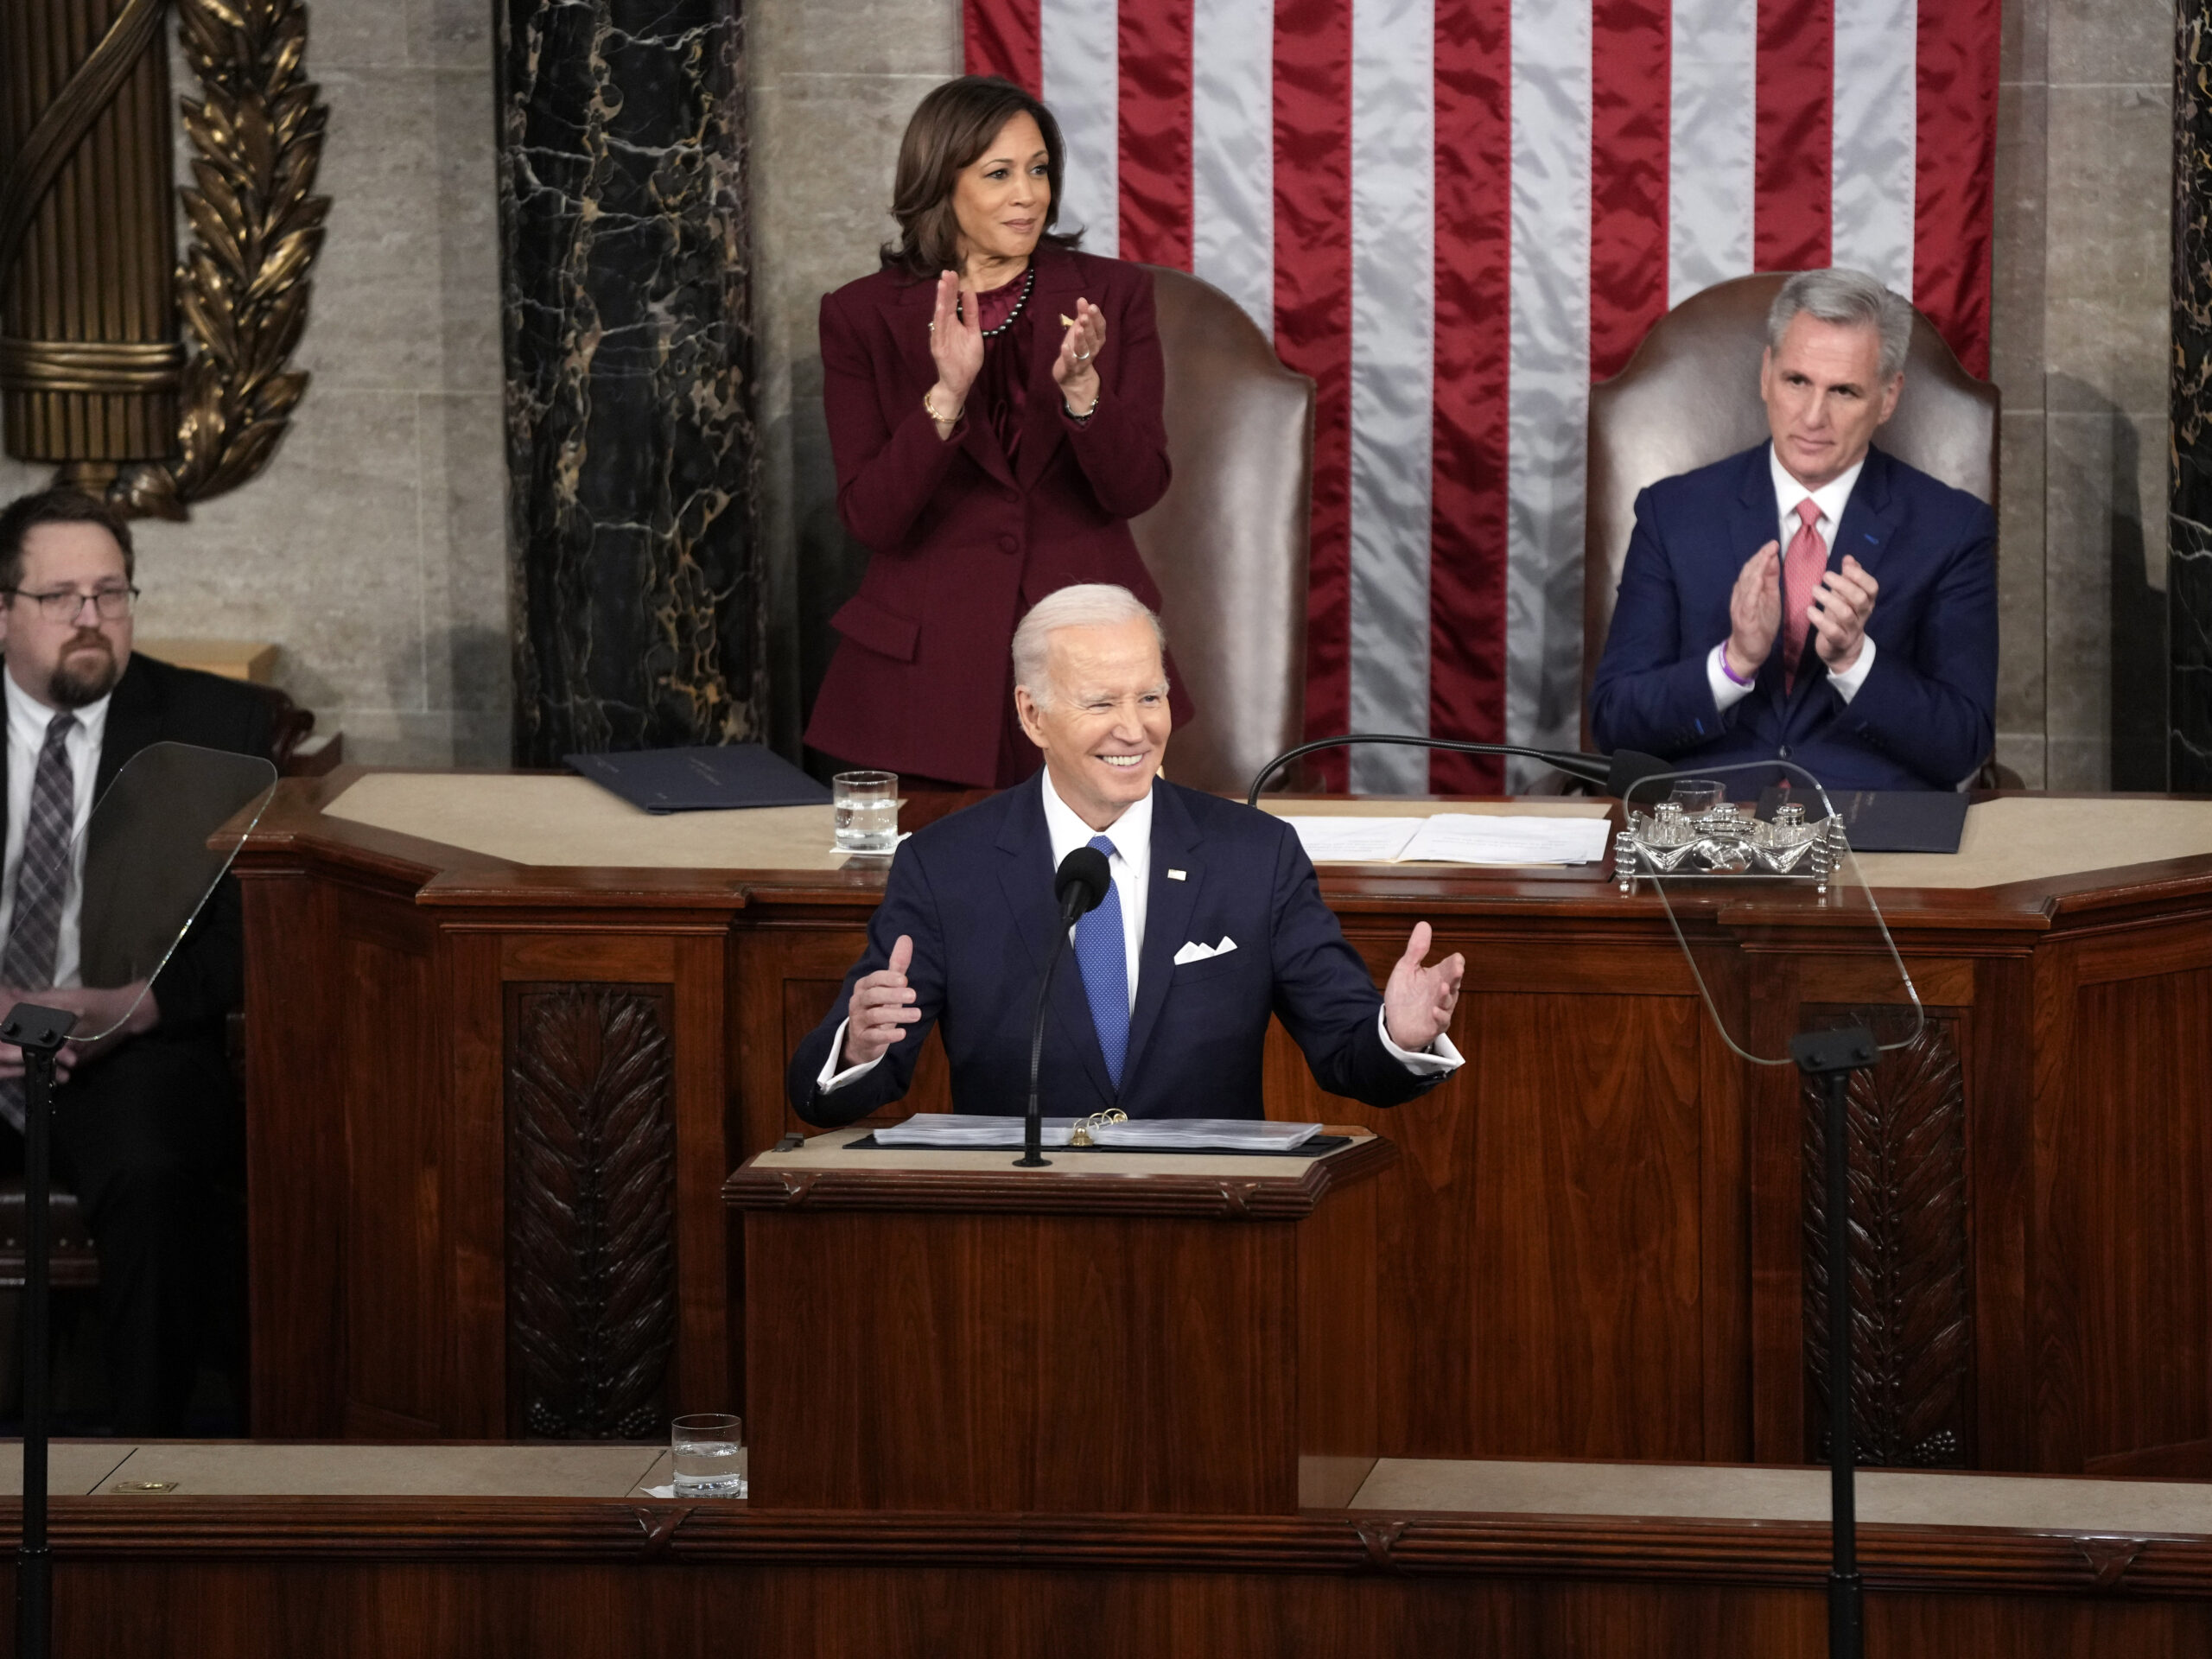 Biden’s test in the State of the Union tonight is to show he’s still got what it takes